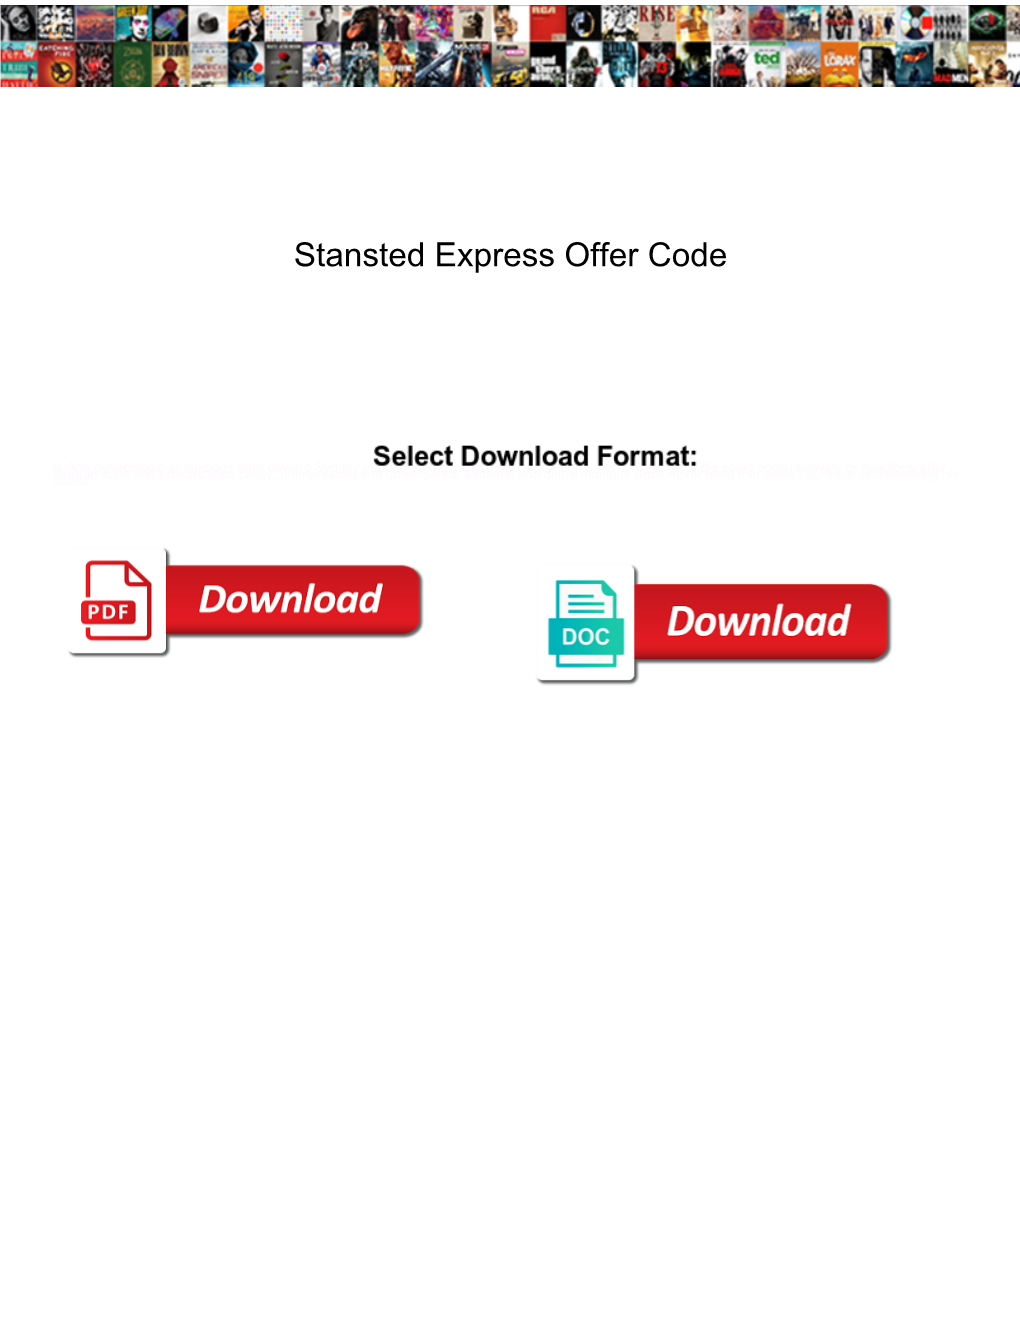 Stansted Express Offer Code